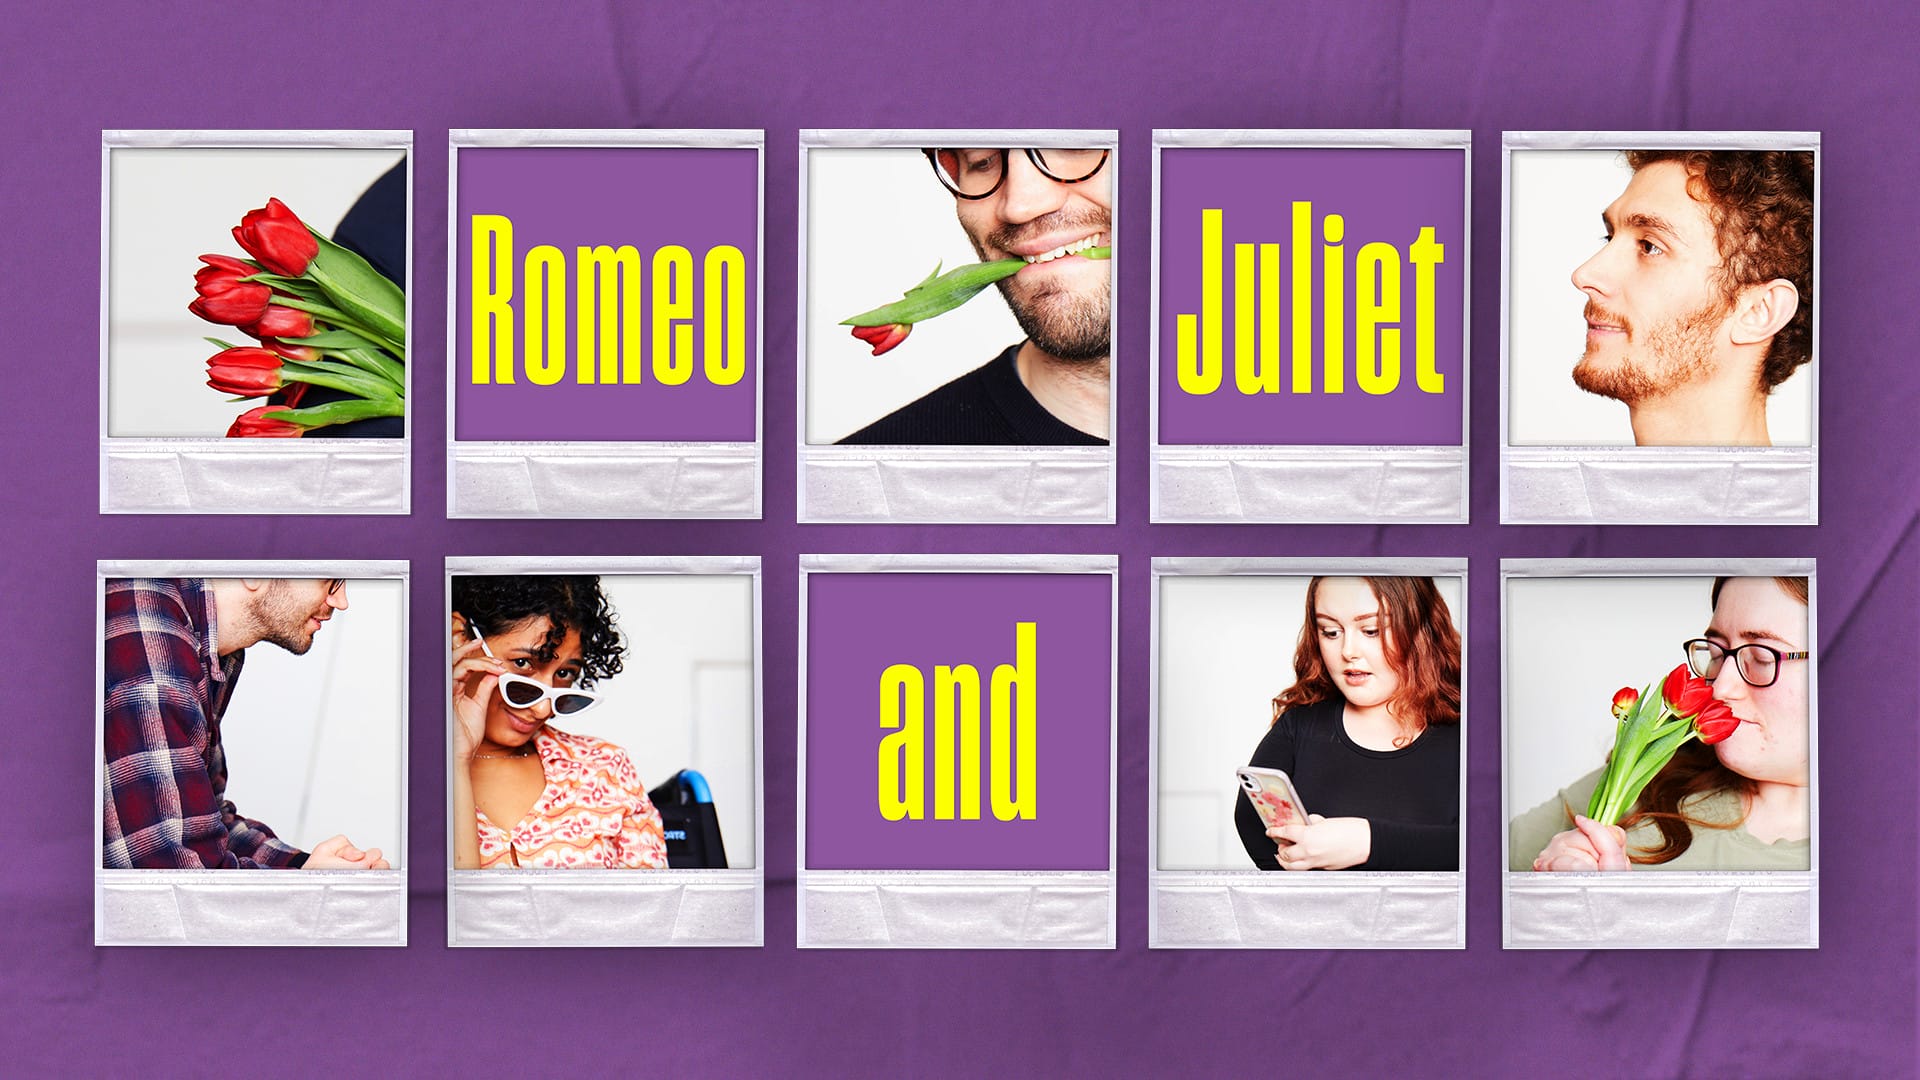 Purple background with a set of 5 polaroid's on top of each other. 3 have the text Romeo and Juliet whilst the others are filled with actors profiles.